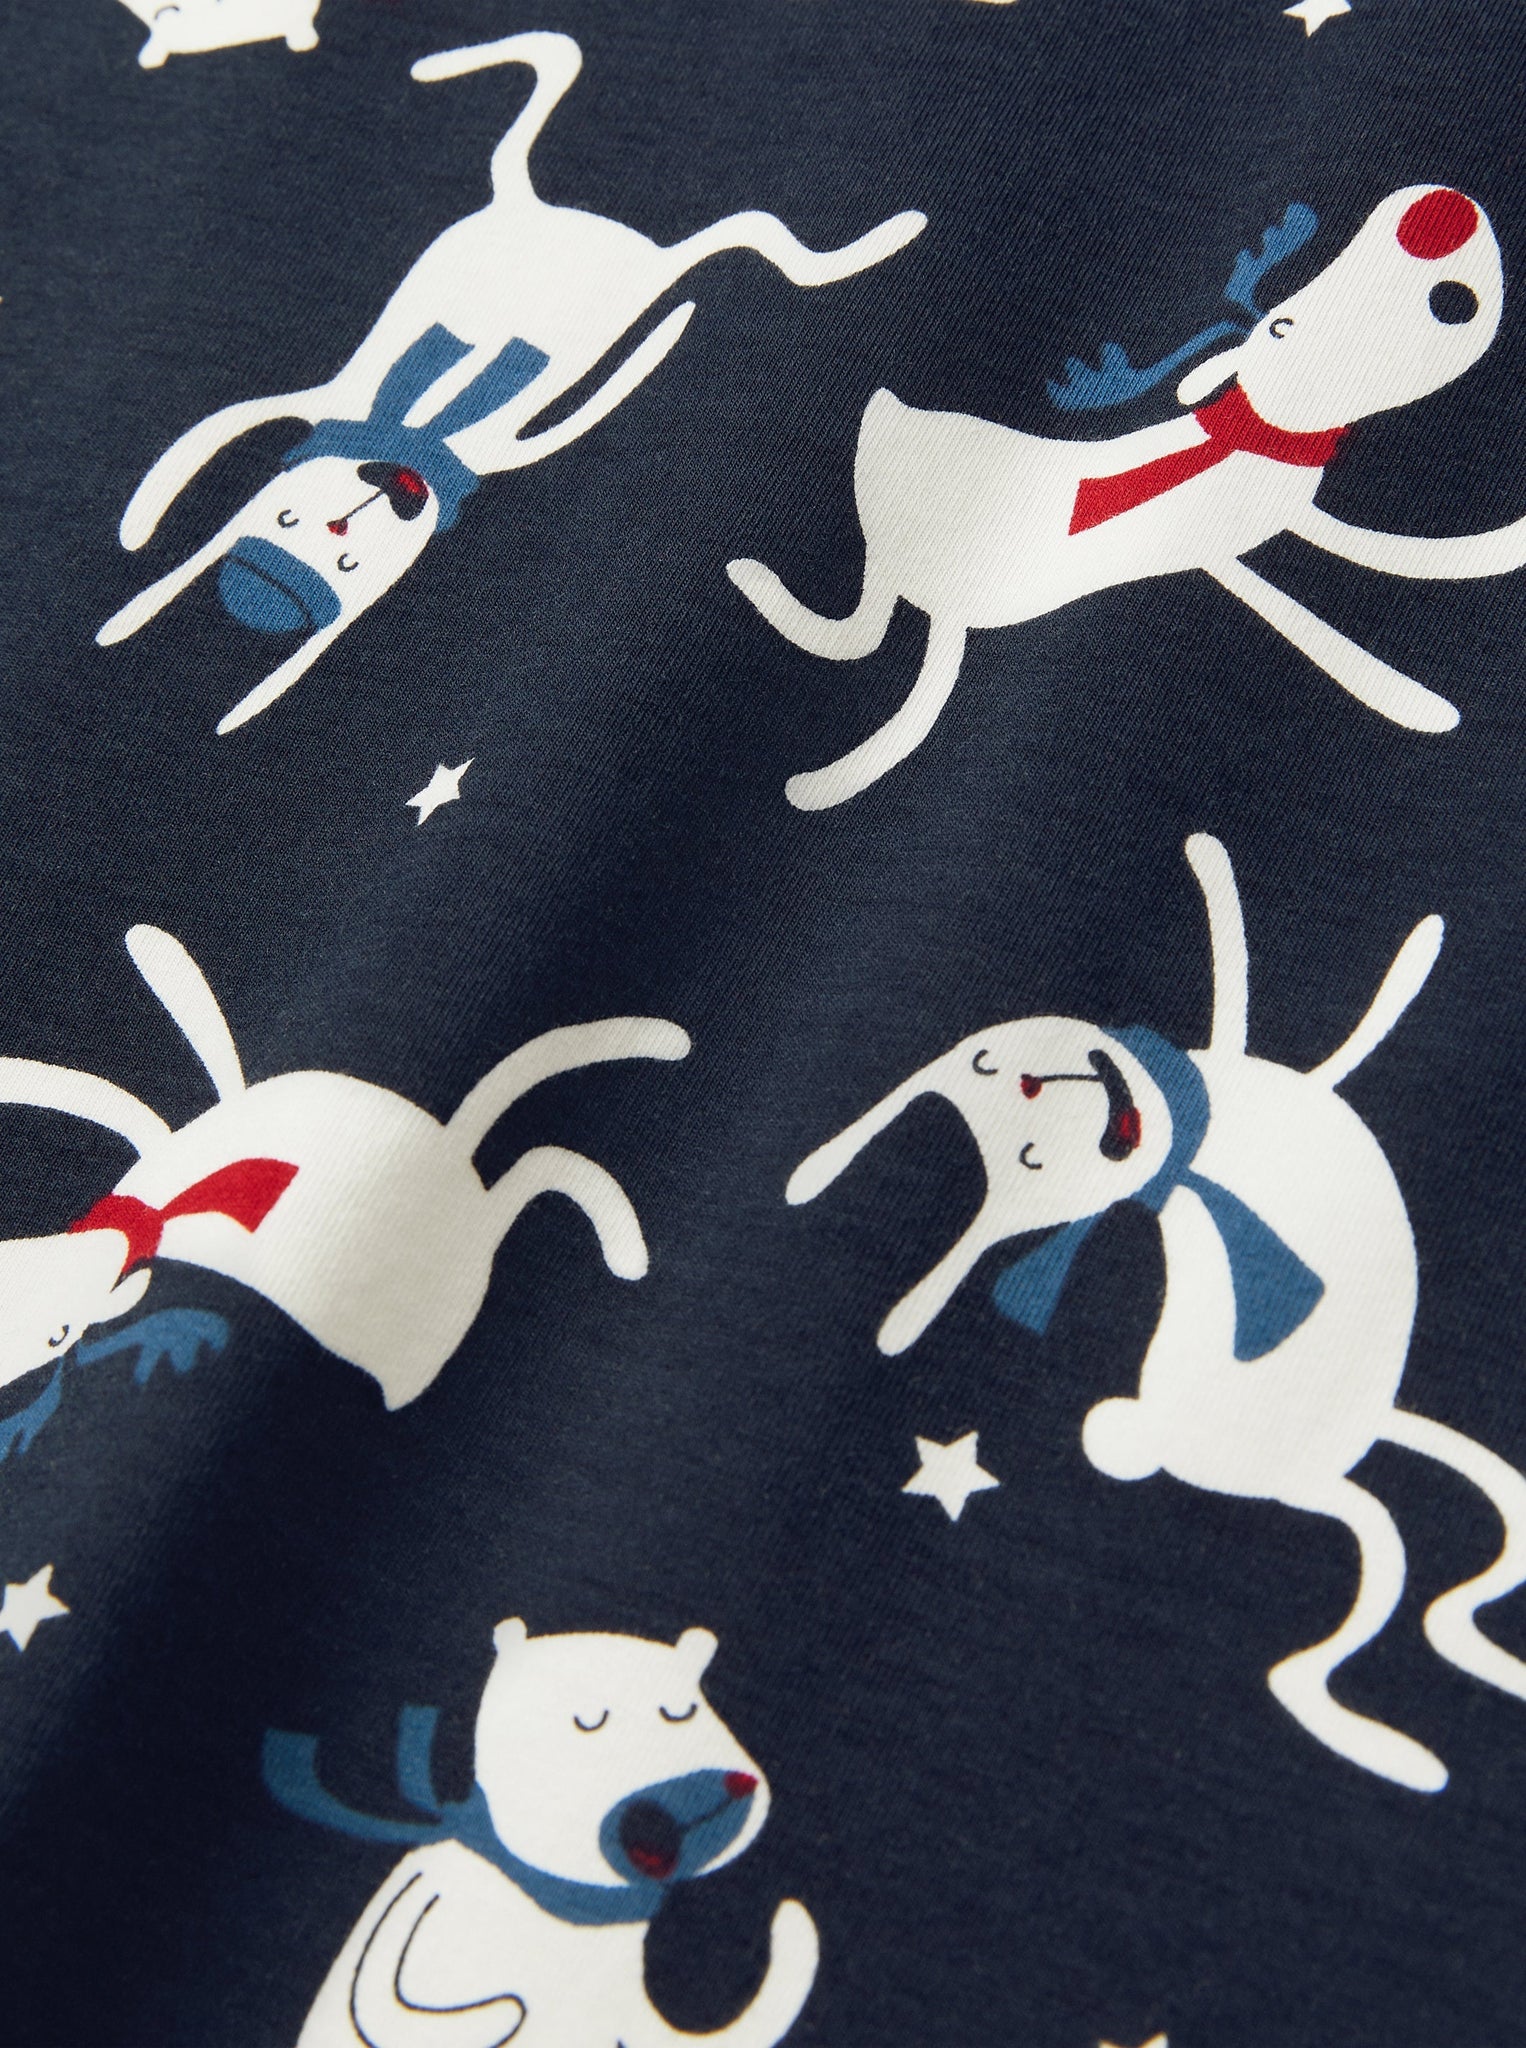 Organic Cotton Kids Christmas Pyjamas from the Polarn O. Pyret kidswear collection. Clothes made using sustainably sourced materials.